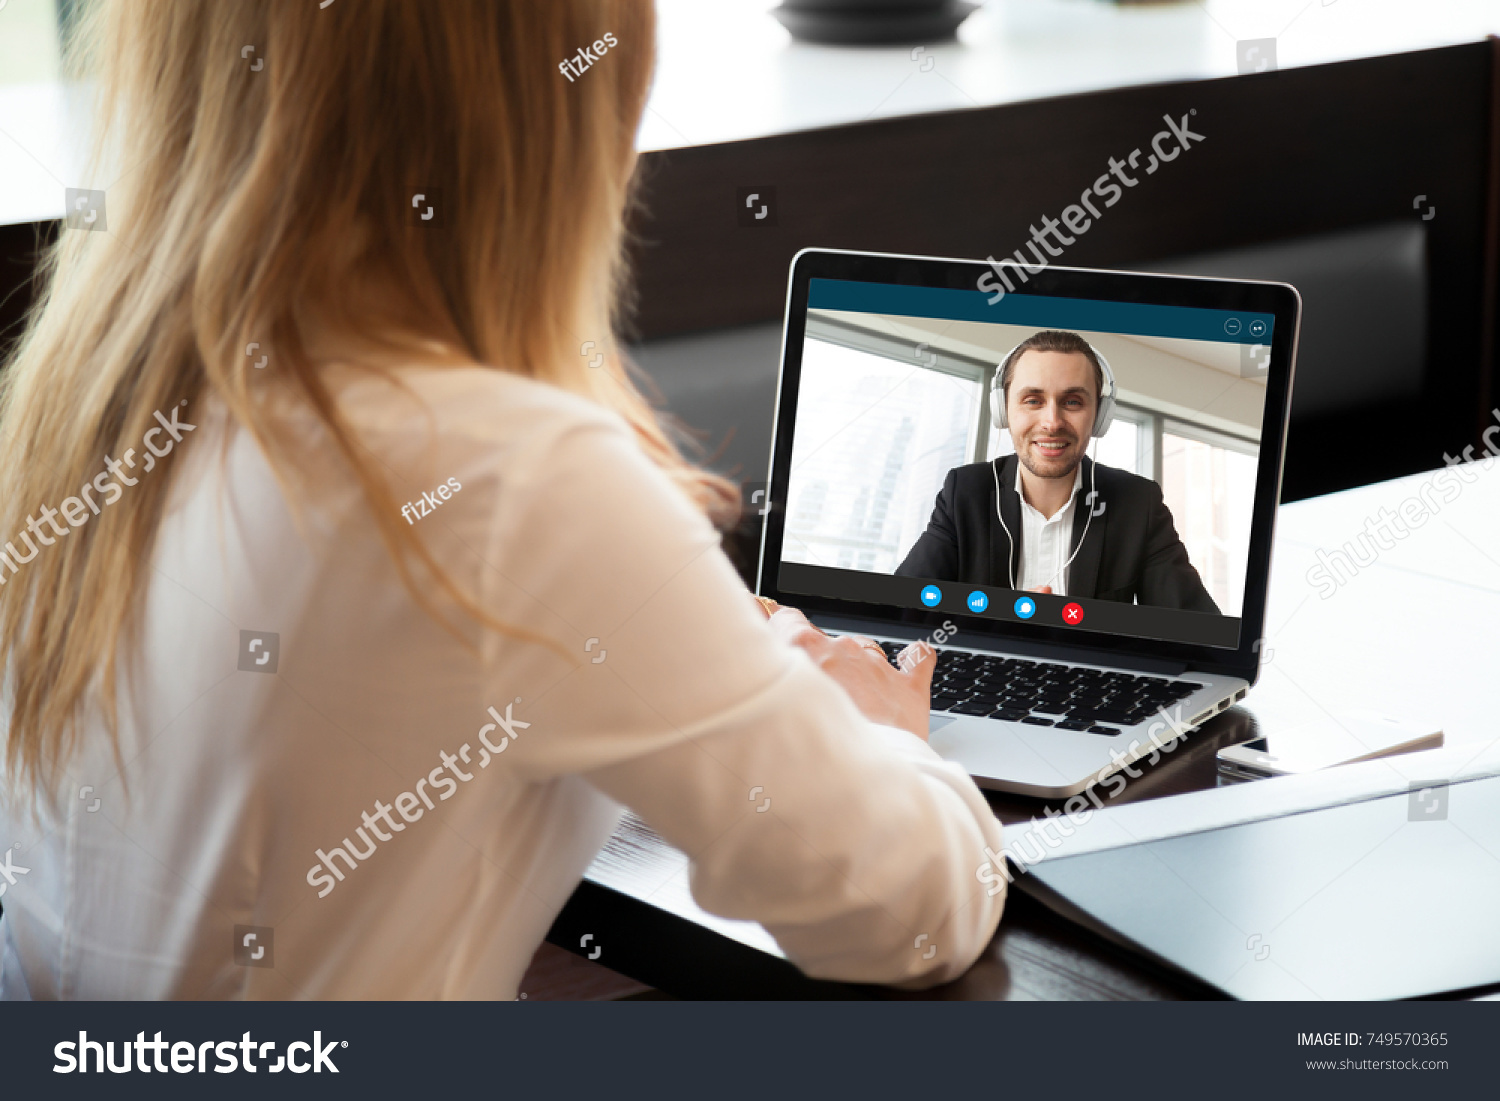 Businesswoman making video call to business partner using laptop. Close-up rear view of young woman having discussion with corporate client. Remote job interview, consultation, human resources concept #749570365